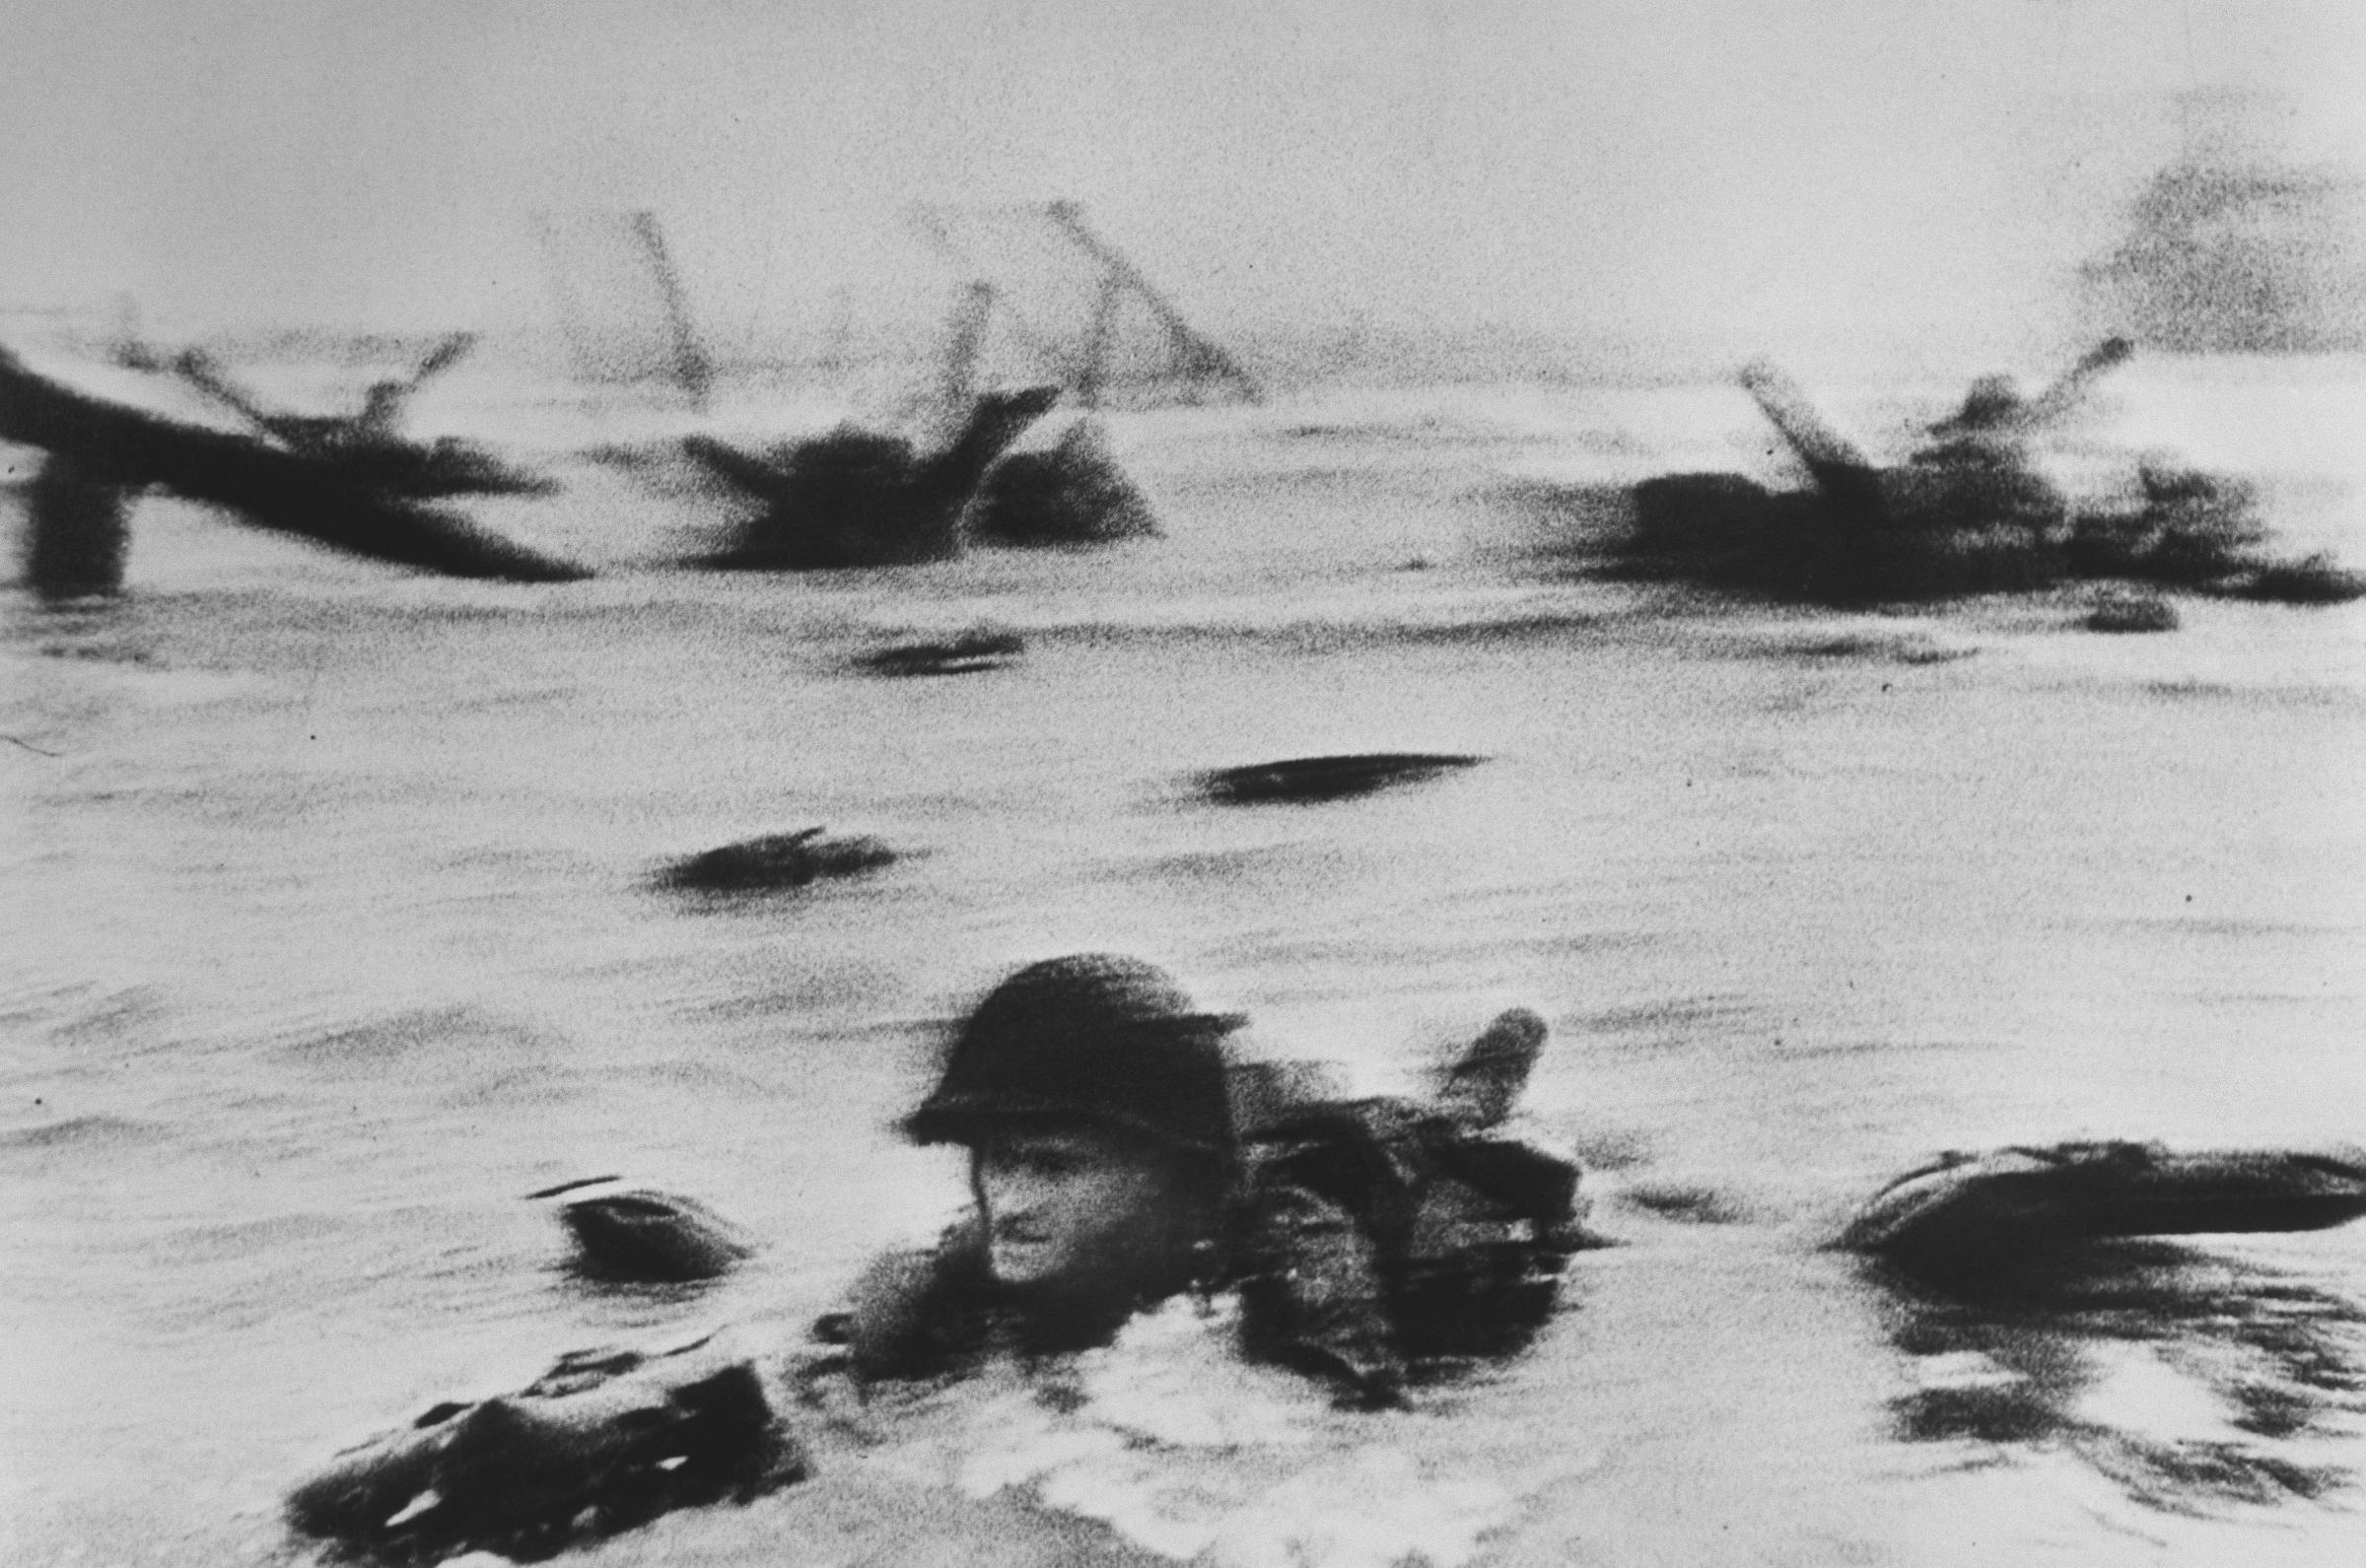 FRANCE. Normandy. June 6th, 1944. US troops assault Omaha Beach during the D-Day landings (first assault).